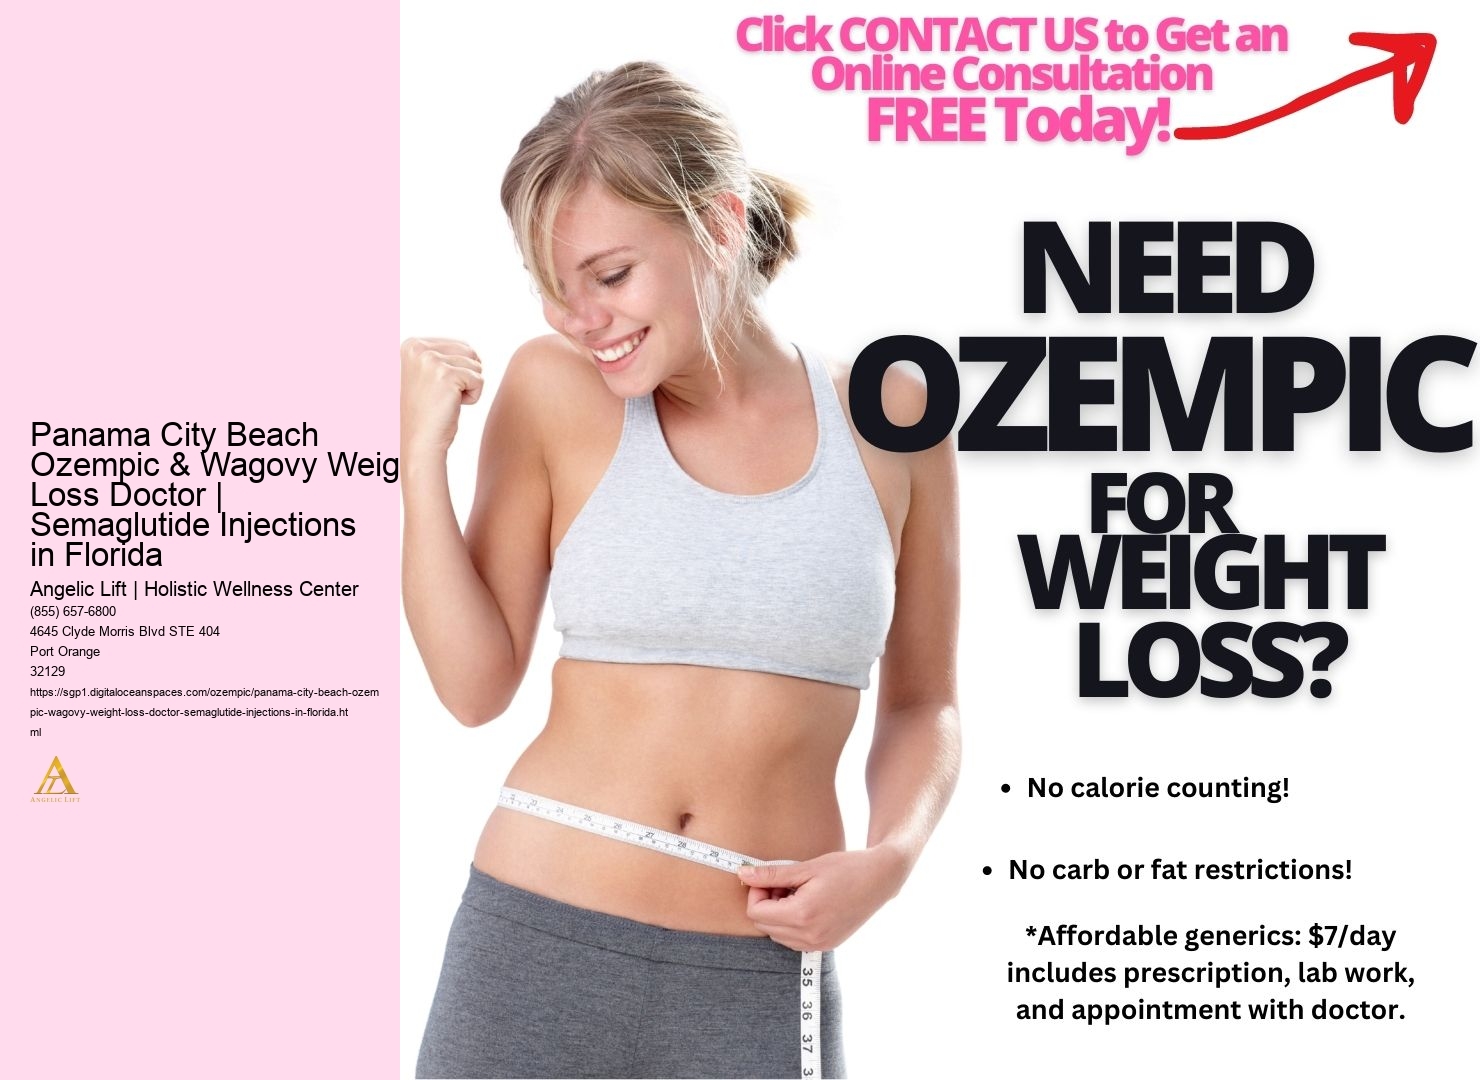 Panama City Beach Ozempic & Wagovy Weight Loss Doctor | Semaglutide Injections in Florida